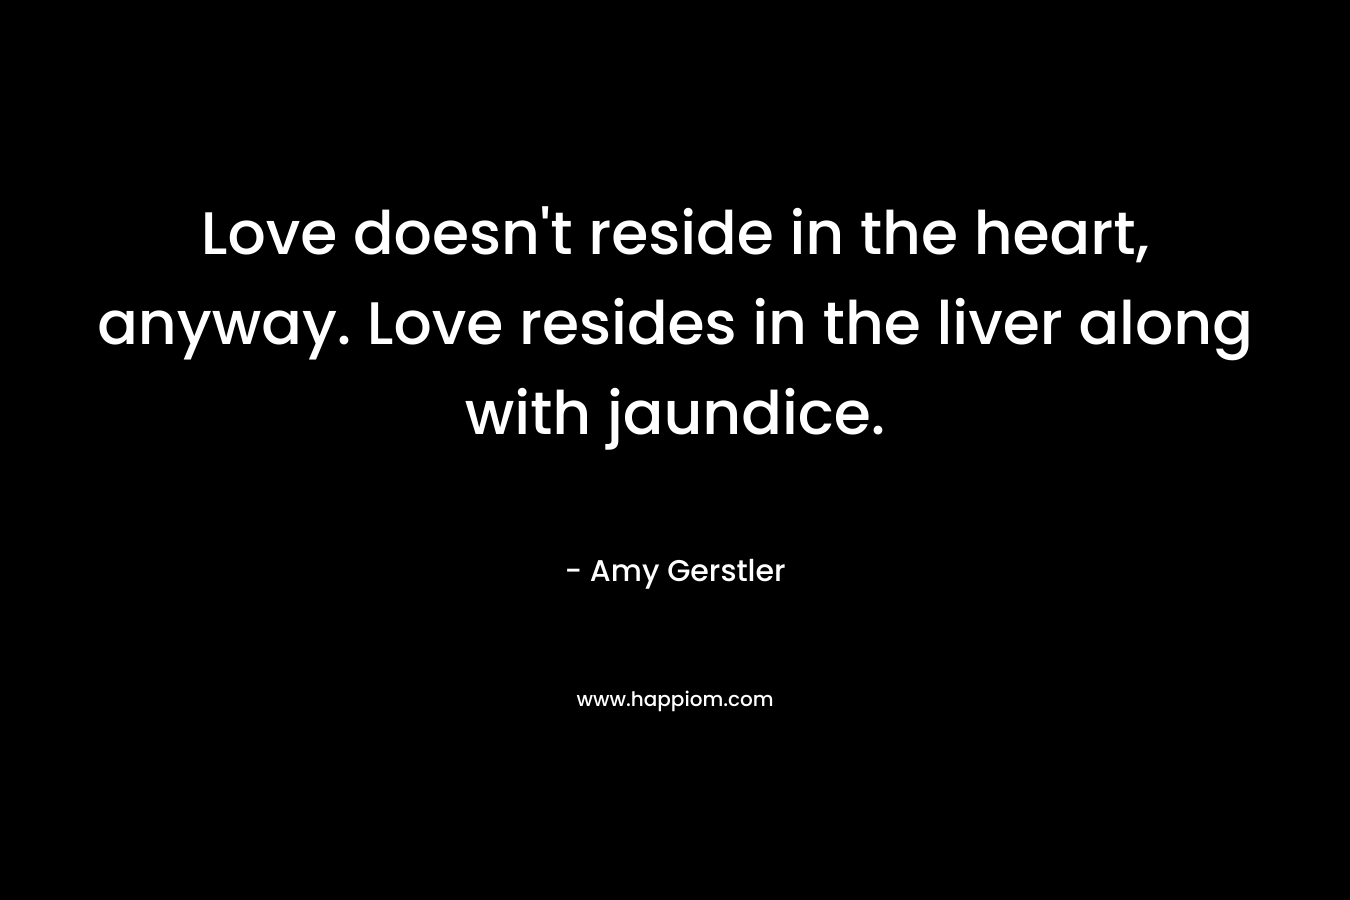 Love doesn’t reside in the heart, anyway. Love resides in the liver along with jaundice. – Amy Gerstler